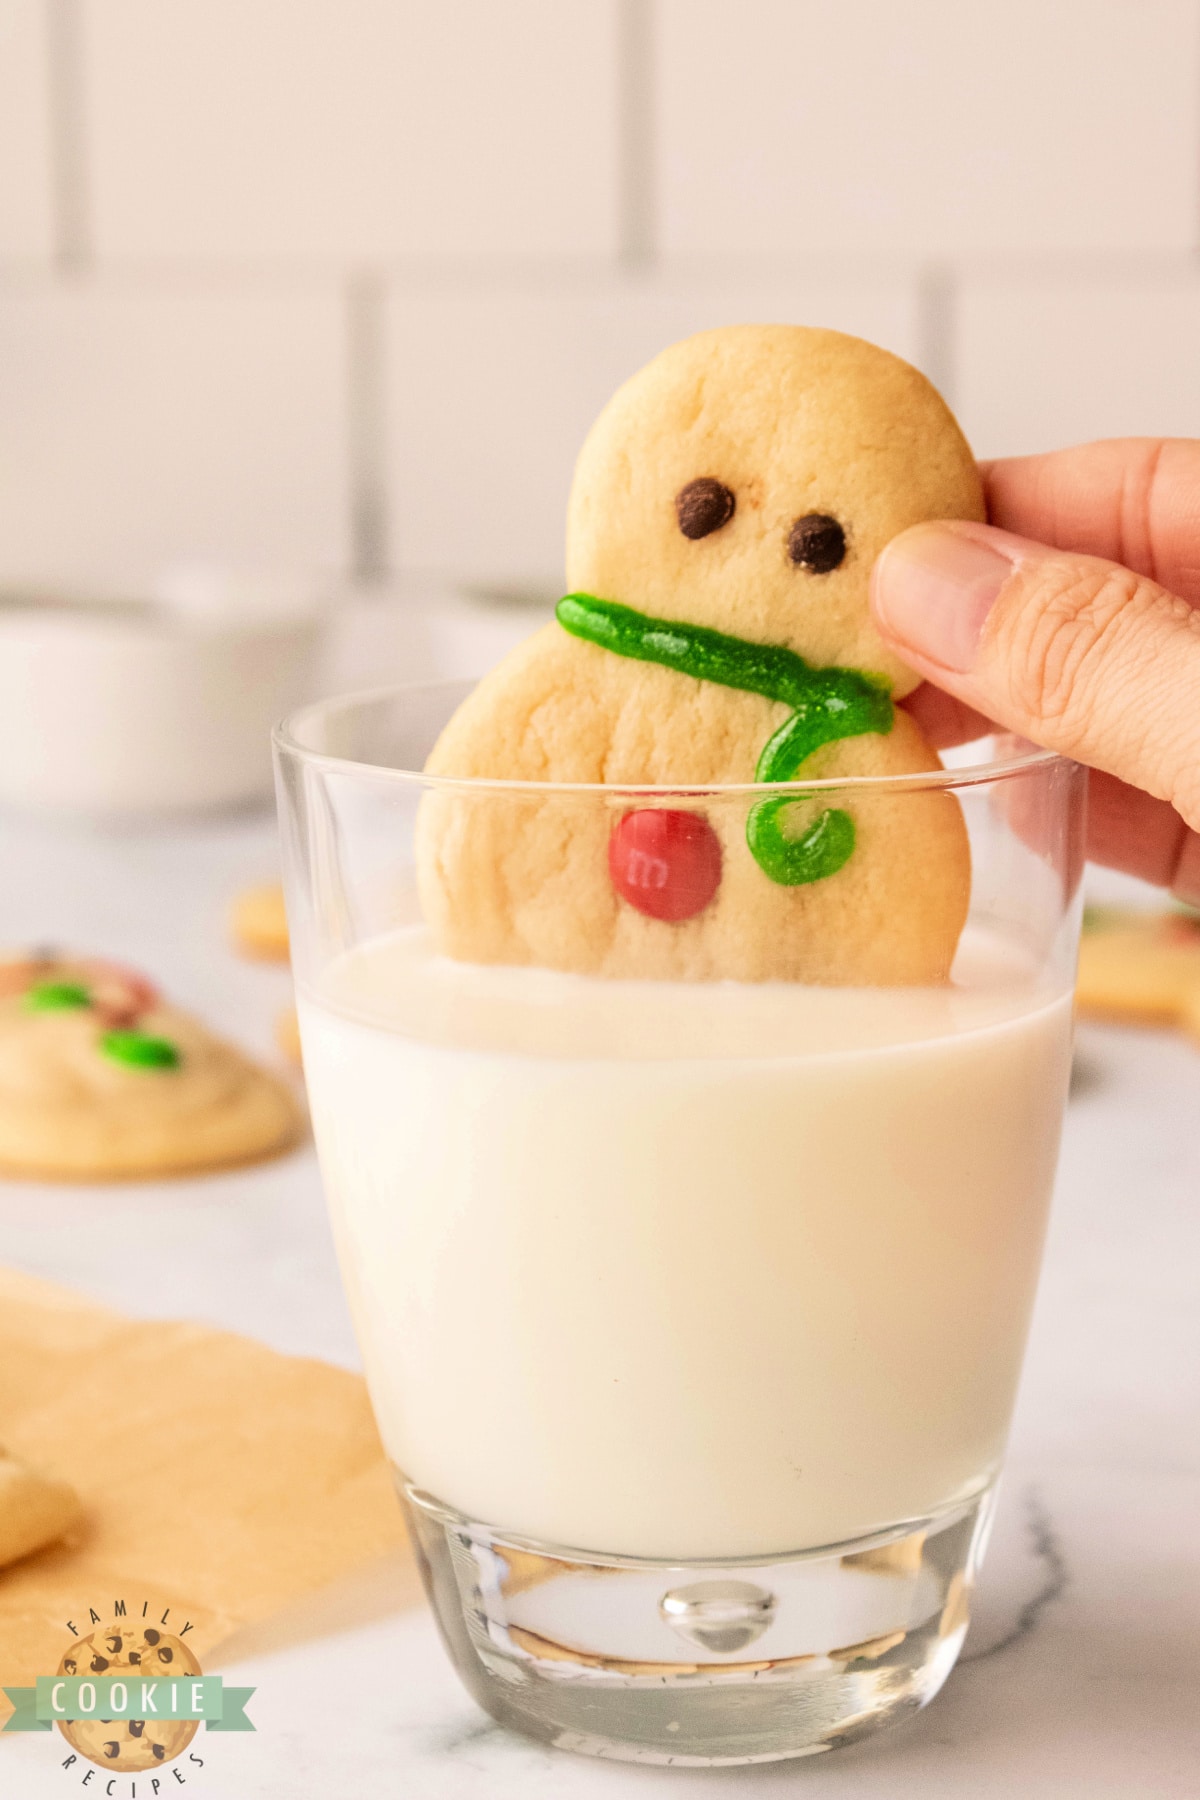 Dipping sugar cookie in a glass of milk.